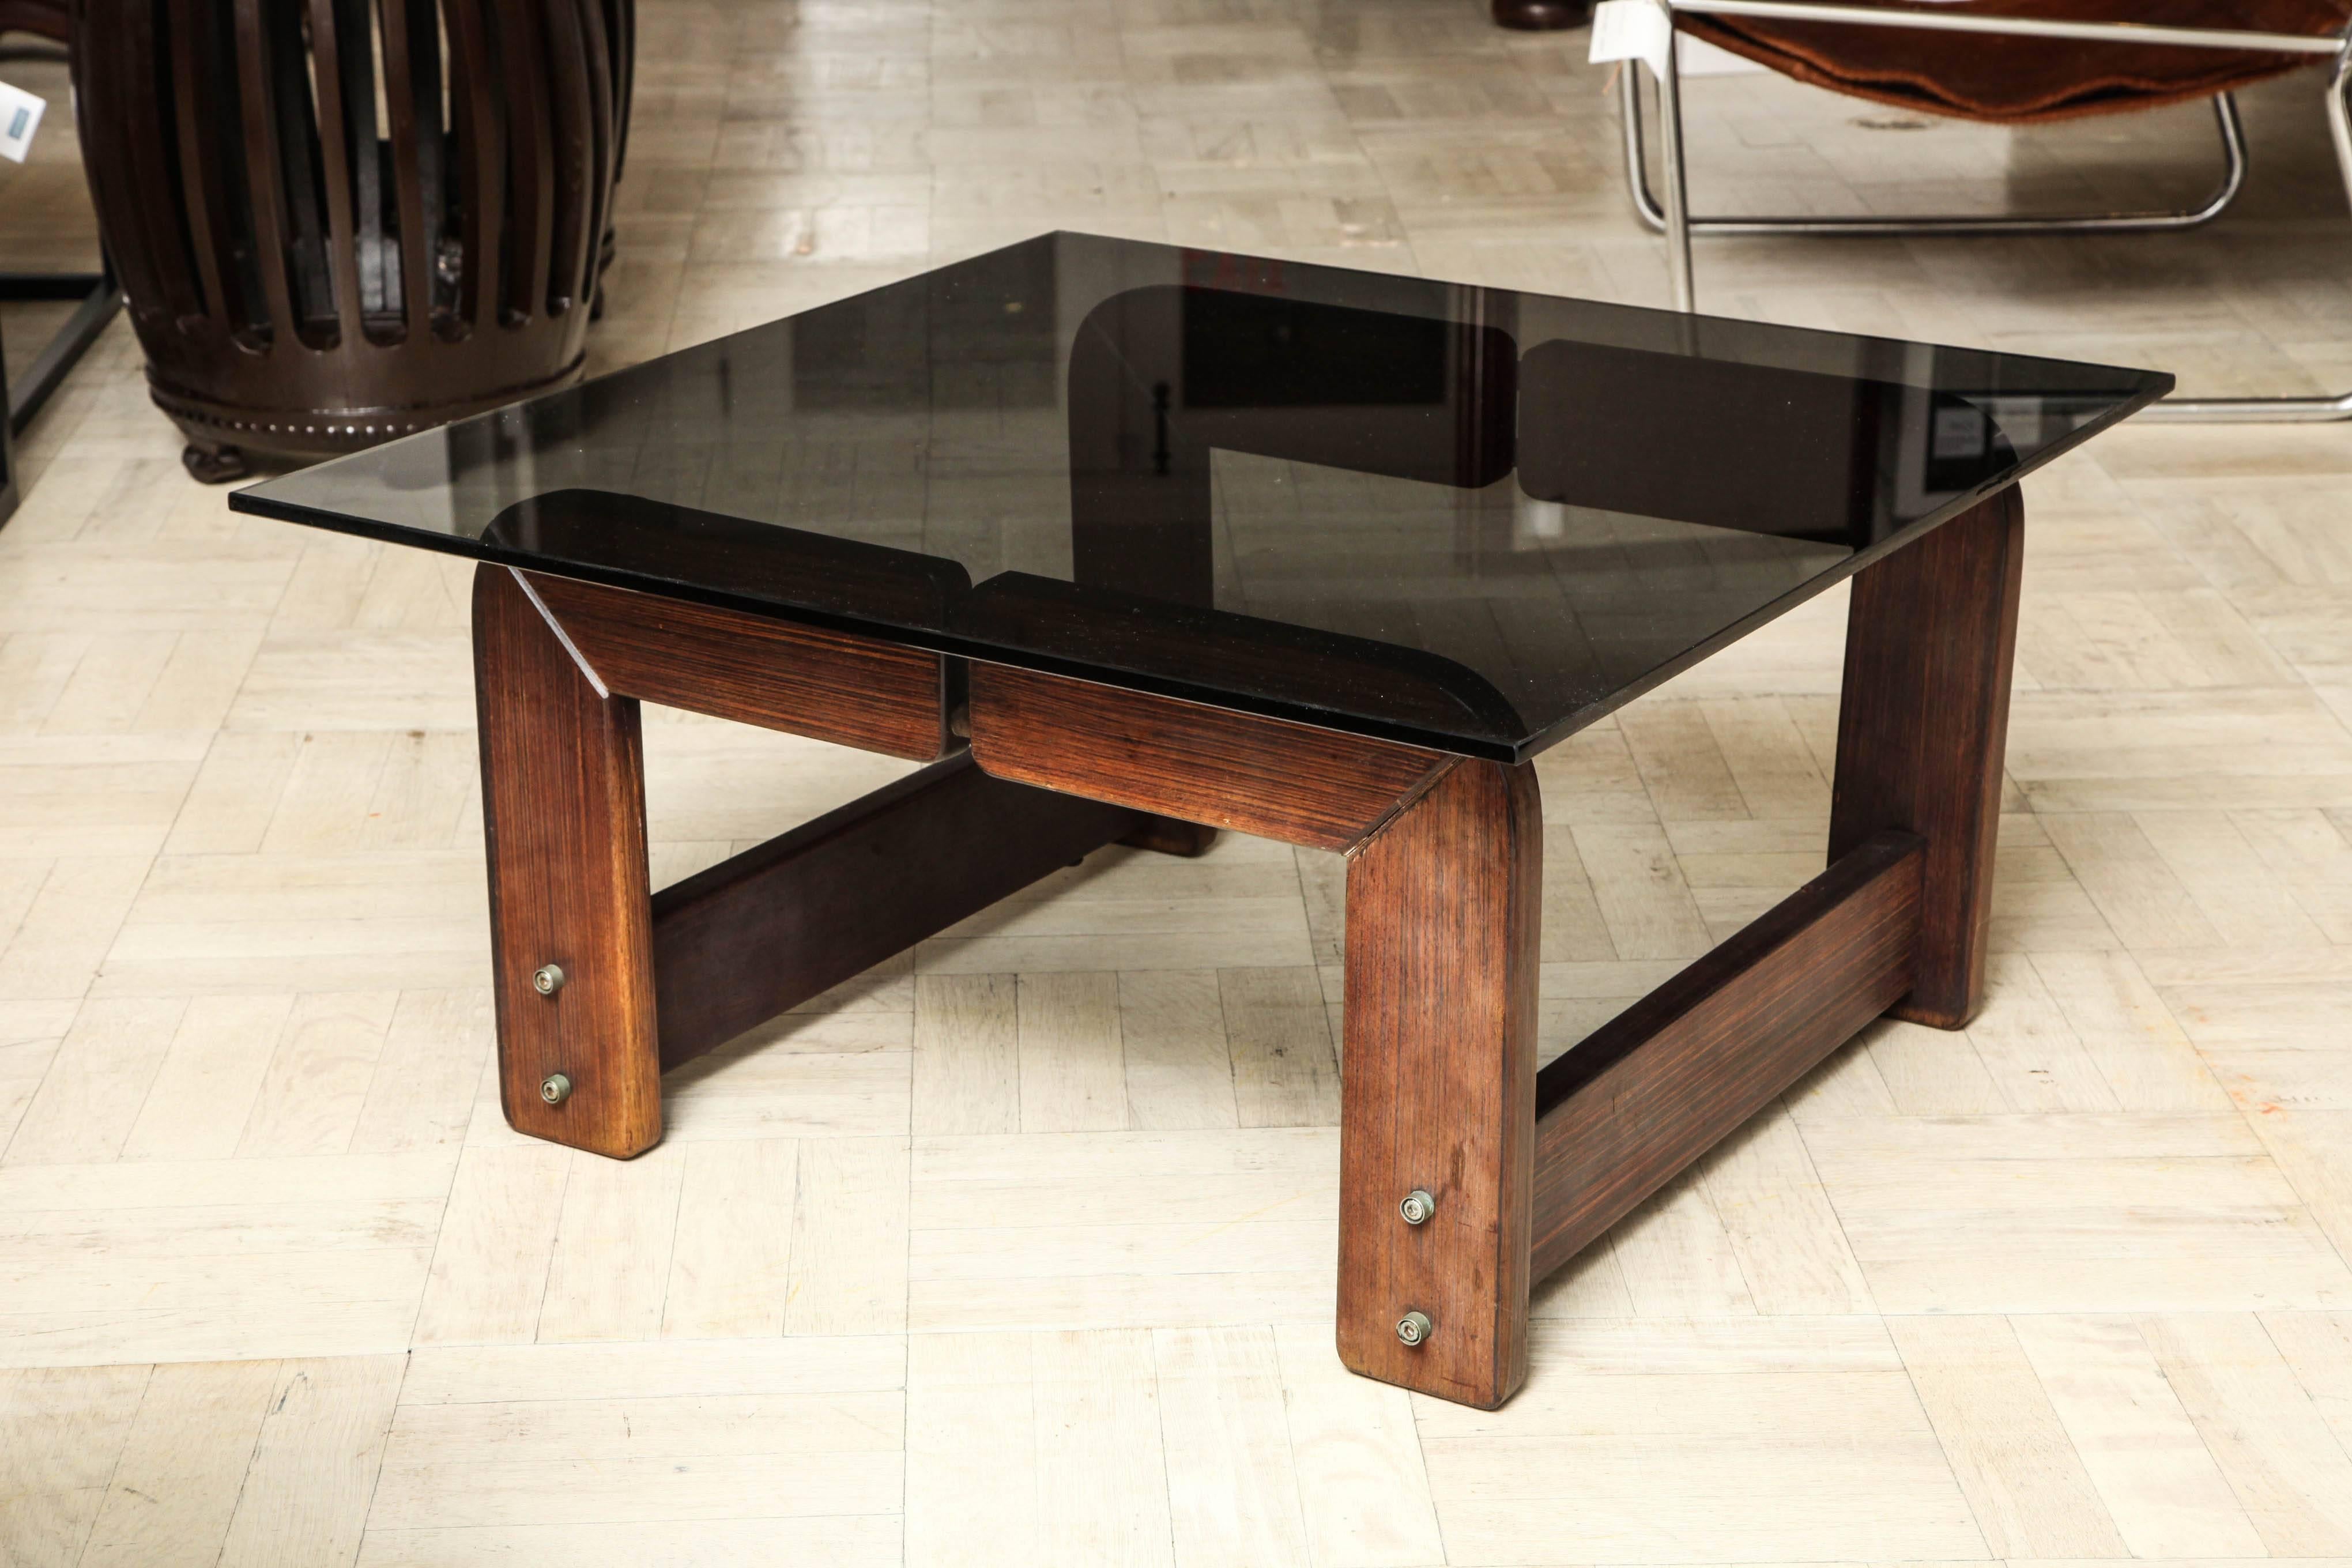 Pair of 20th century exotic wood and smoked glass tables.
